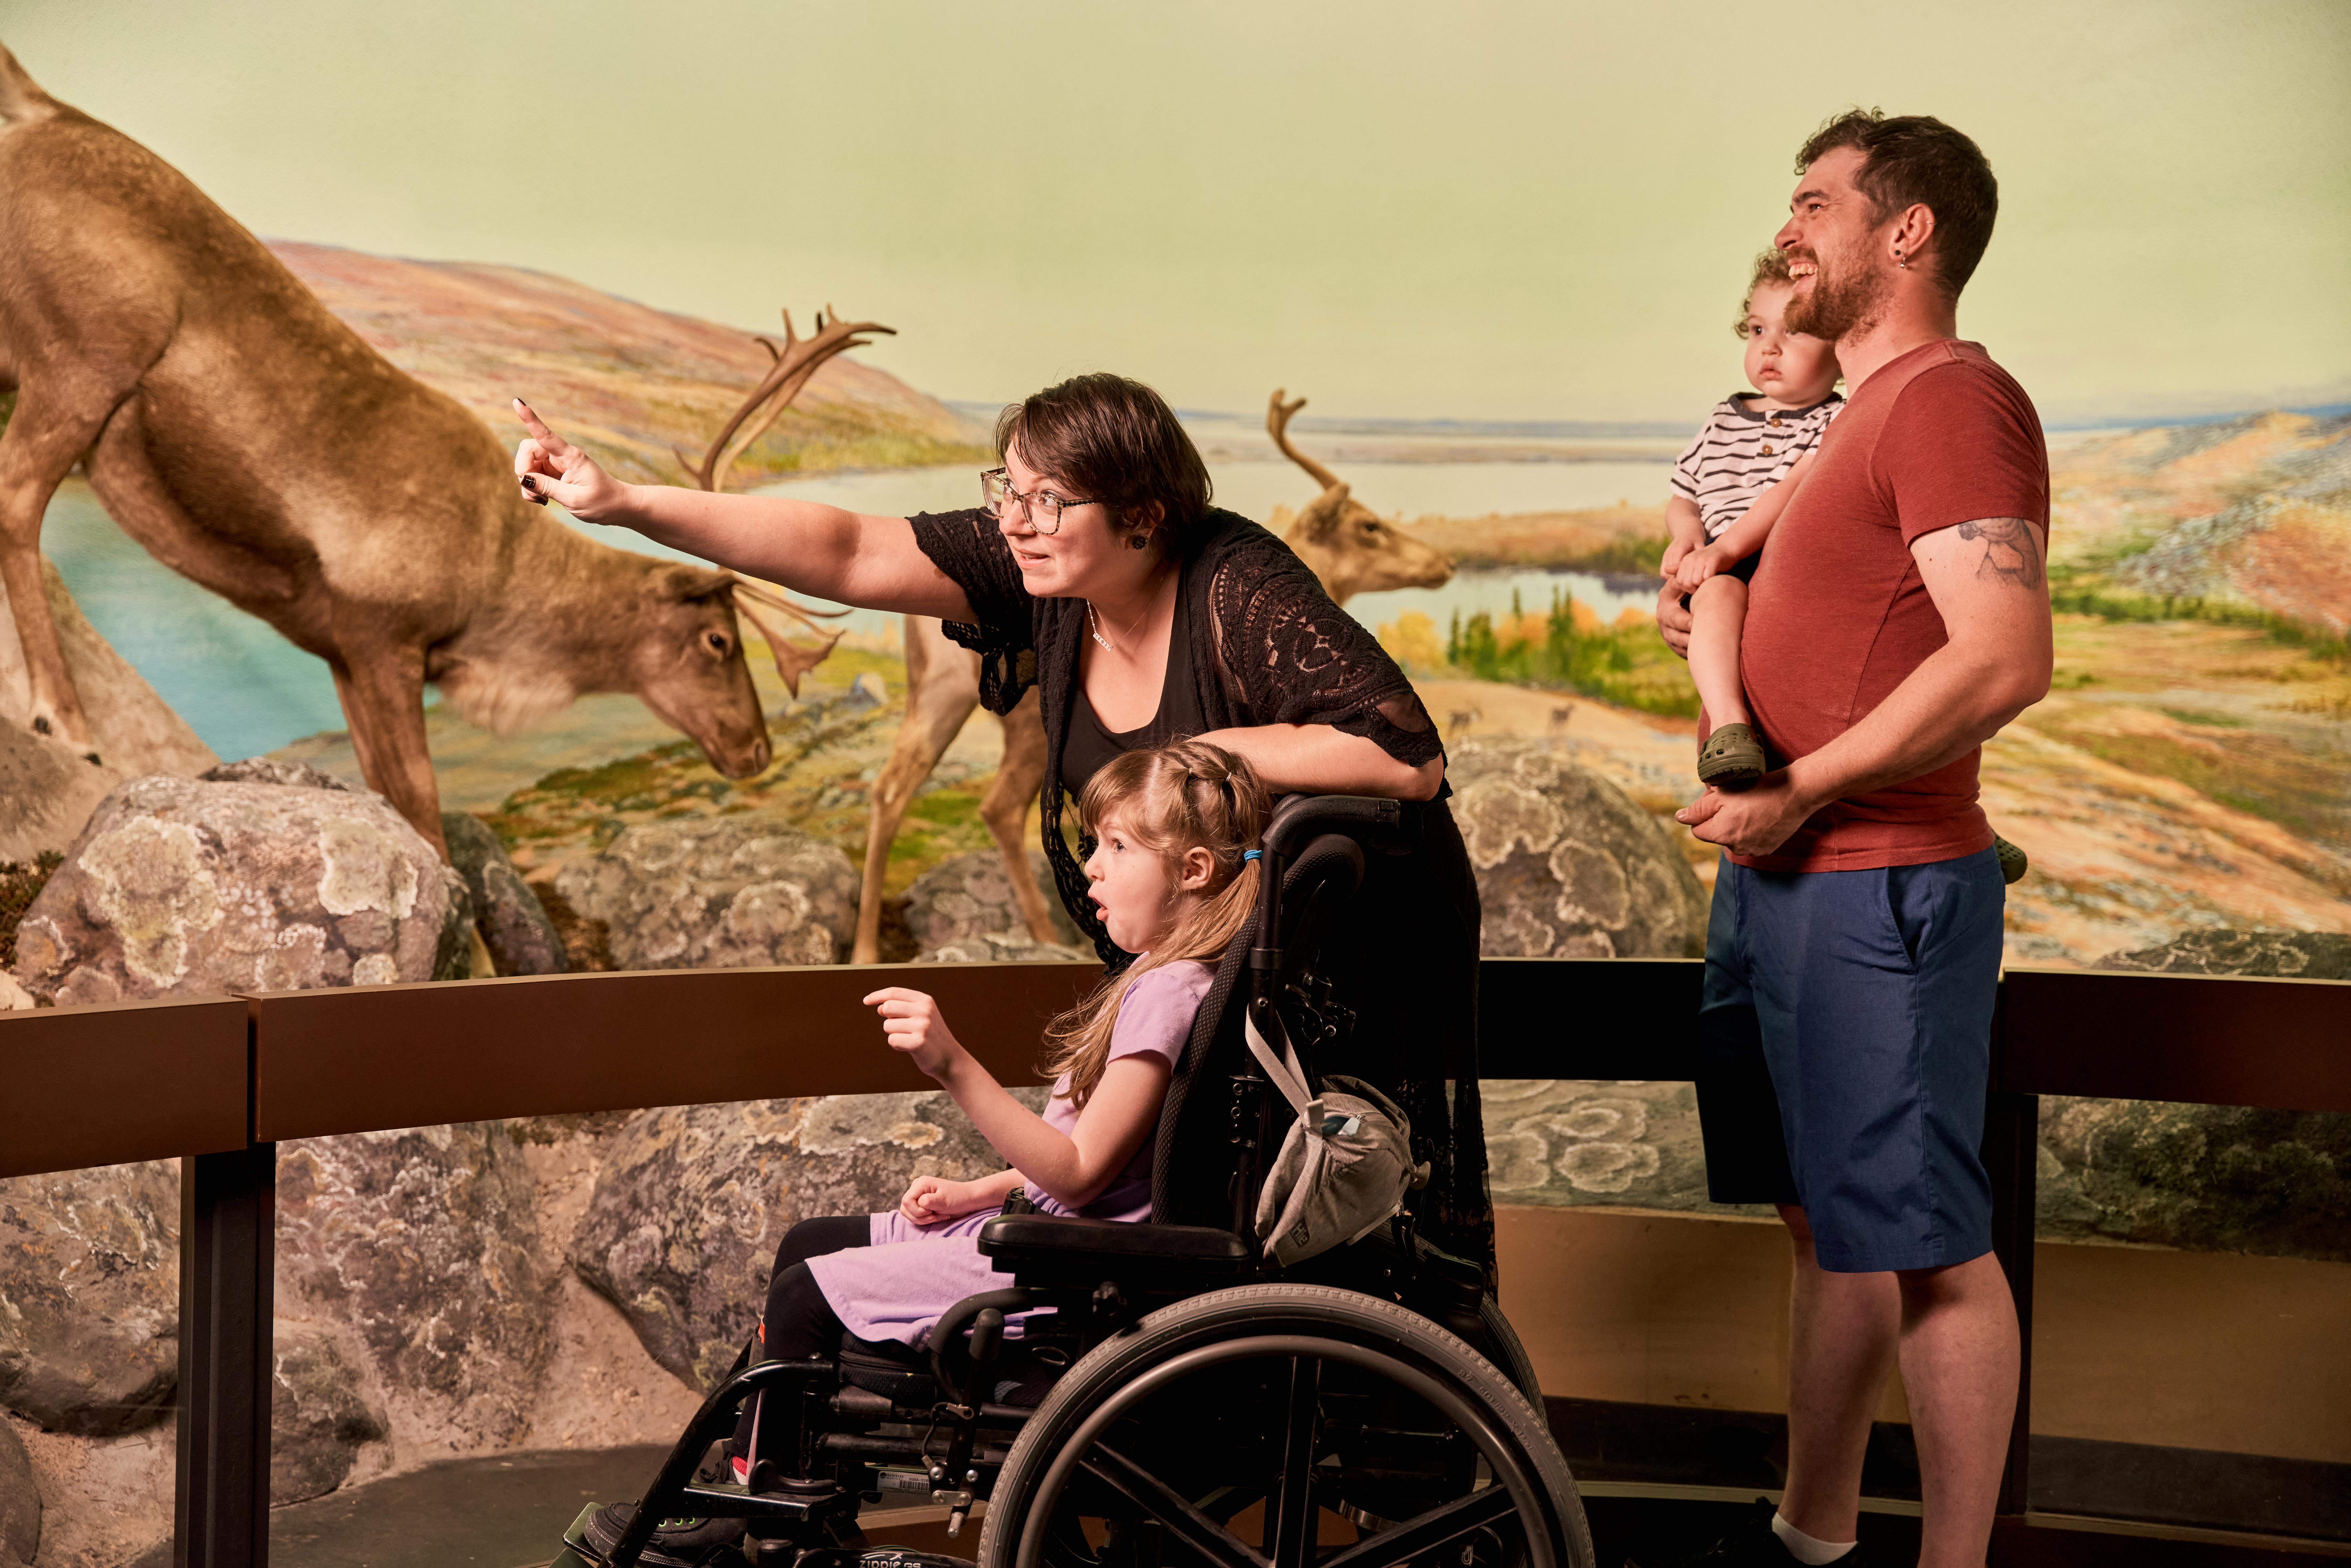 A family of four stand in front of a Museum diorama containing several caribou. One of the adults leans down to point something out to a child in a wheelchair, and the other adult stands behind holding a toddler.